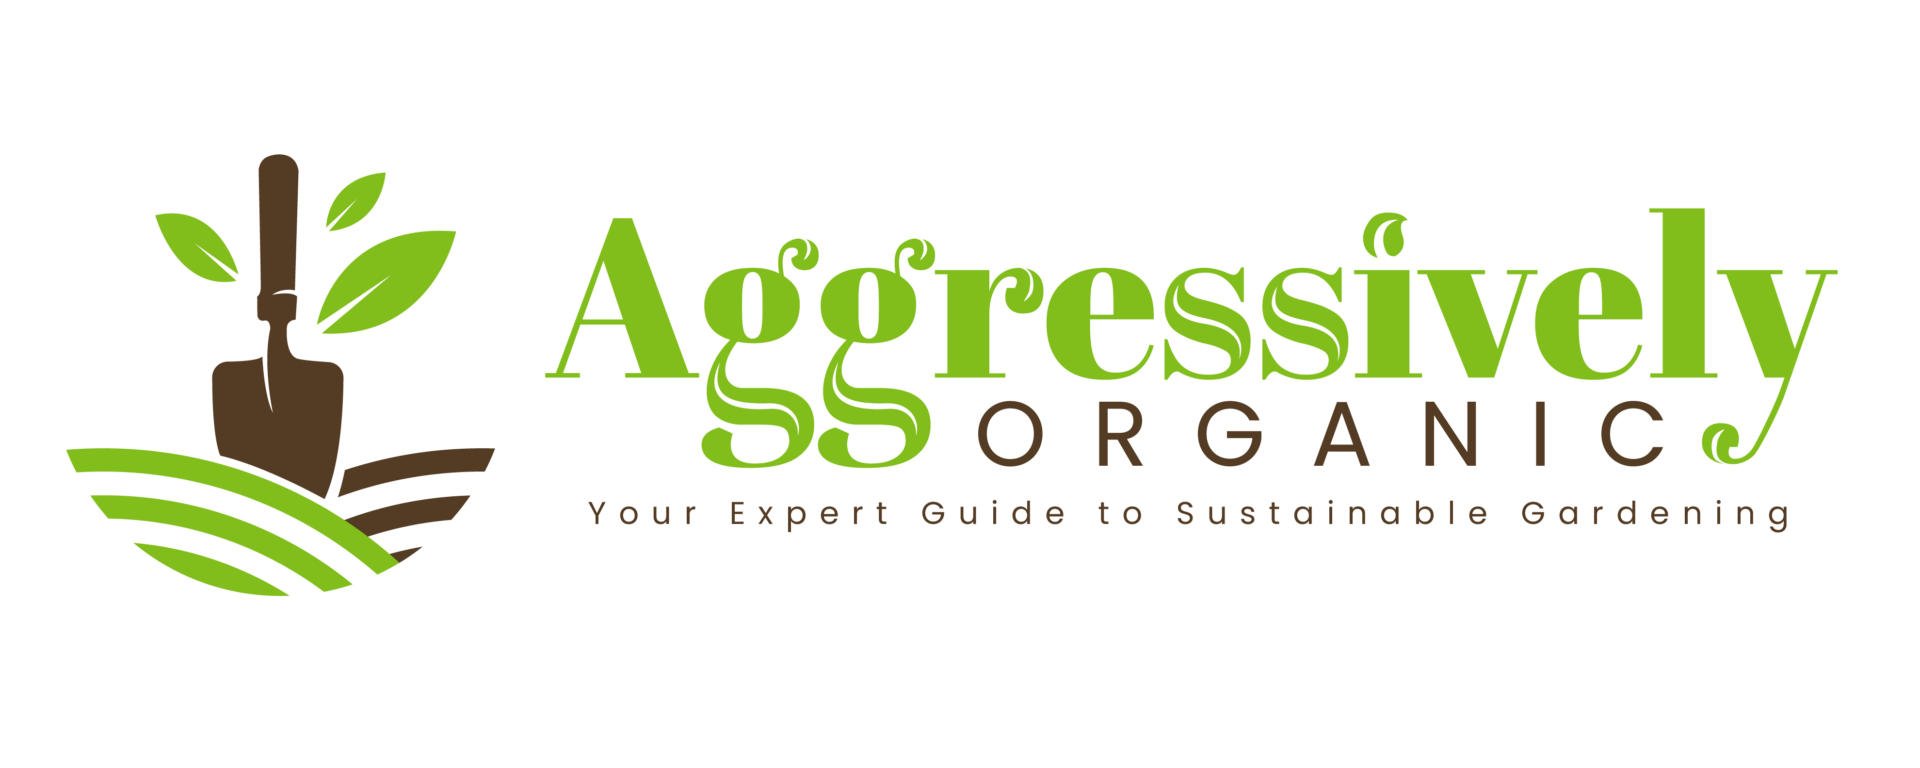 Aggressively Organic – Your Expert Guide to Sustainable Gardening